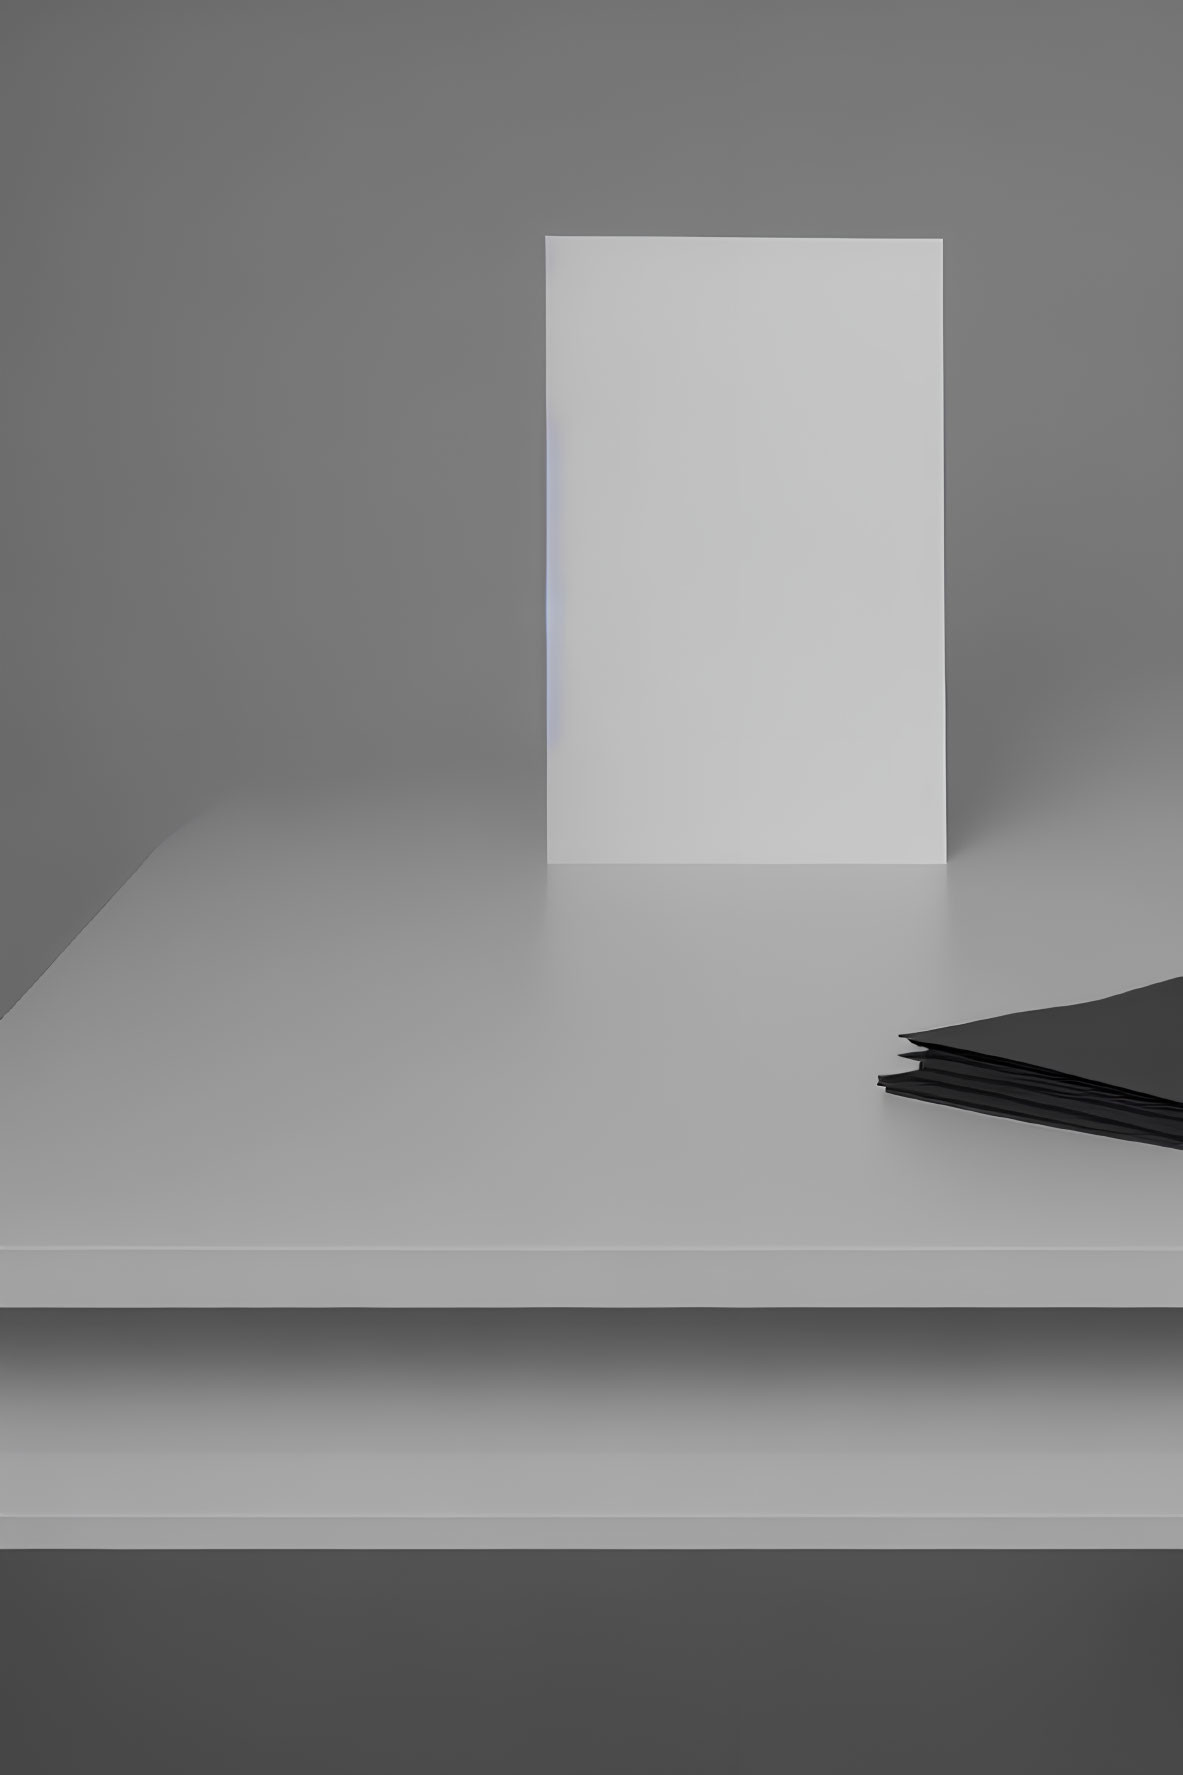 White canvas on grey tabletop with black sheets, grey background